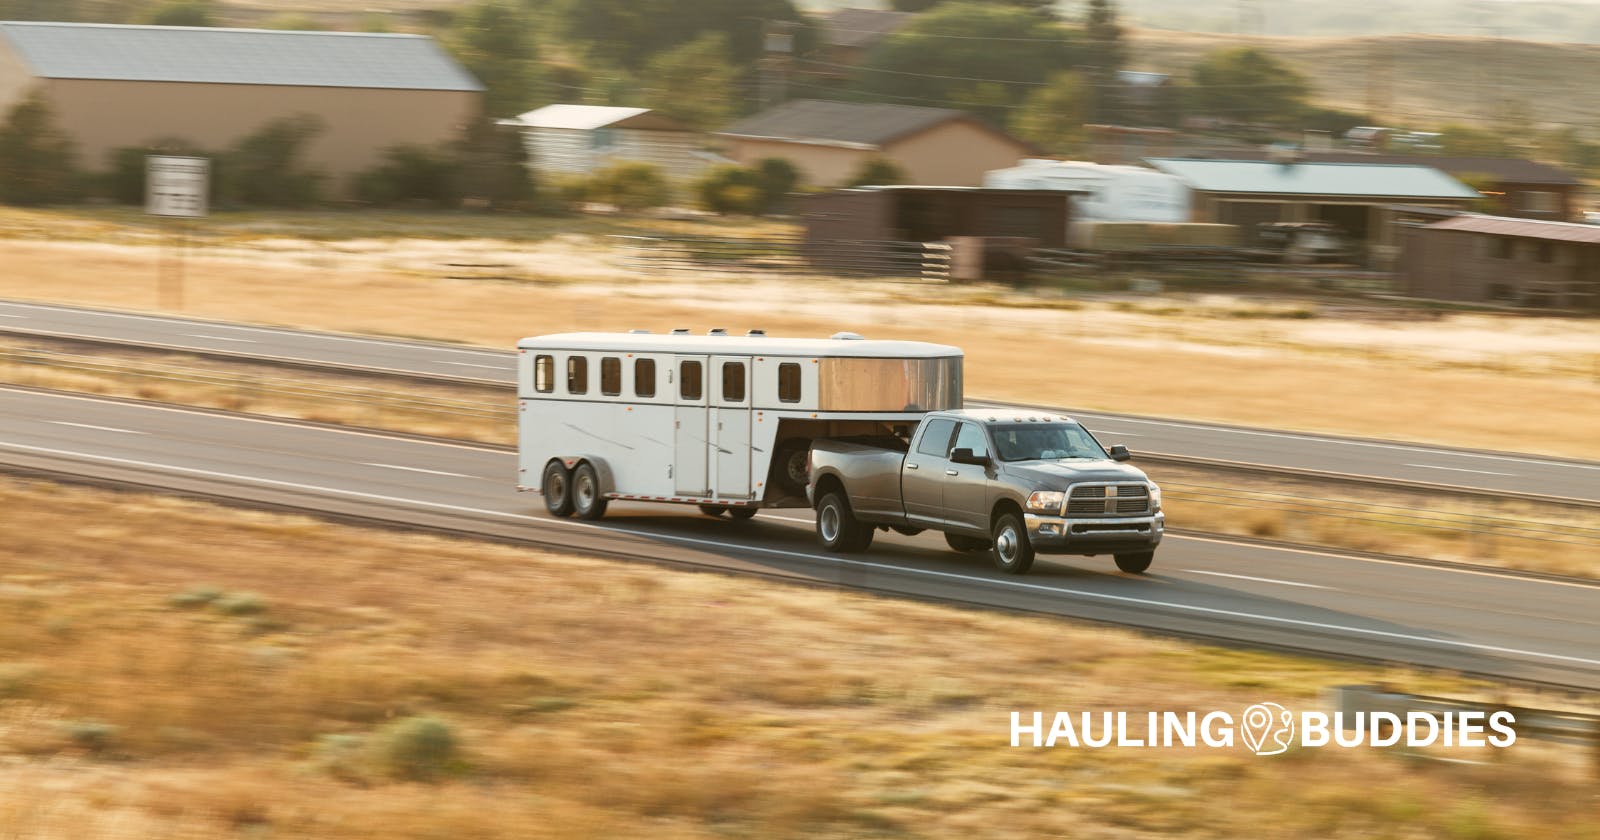 Eliminating the Middleman: How Hauling Buddies is Streamlining the Animal Transportation Industry